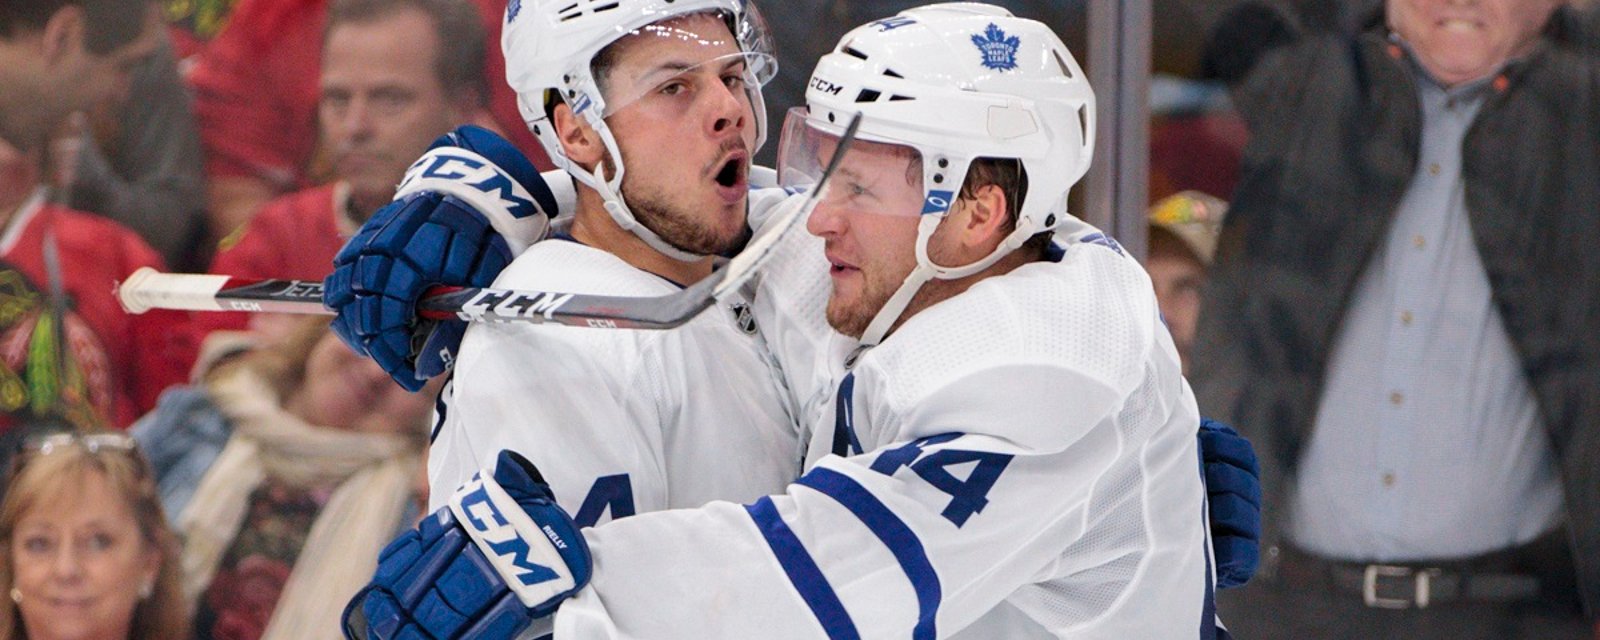 Leafs showcase revamped powerplay unit featuring Matthews, Marner and Tavares on Monday.